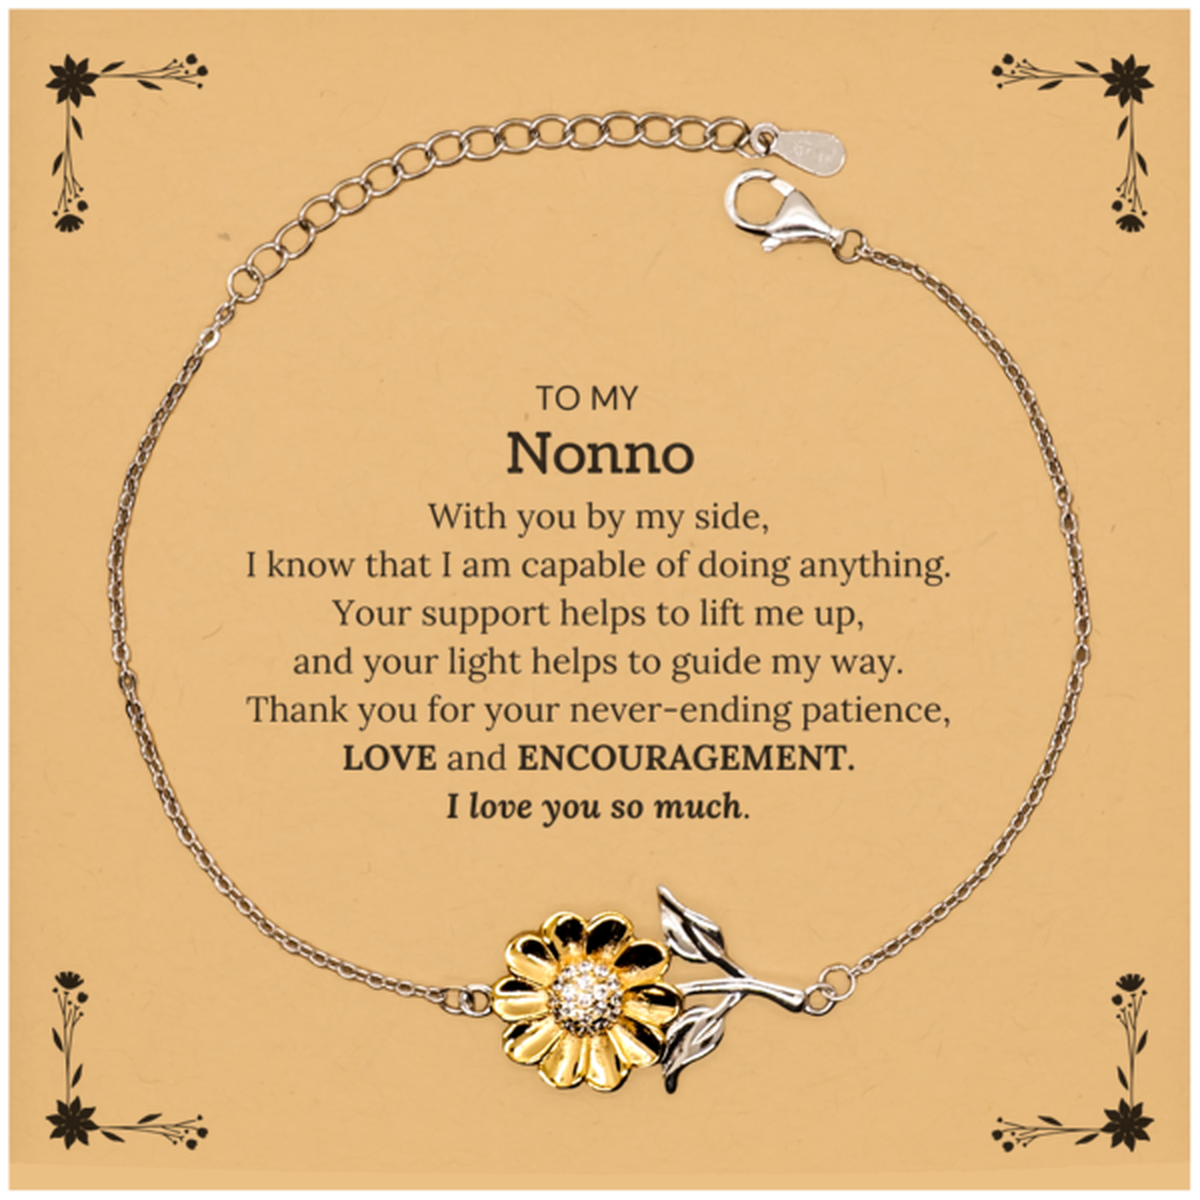 Appreciation Nonno Sunflower Bracelet Gifts, To My Nonno Birthday Christmas Wedding Keepsake Gifts for Nonno With you by my side, I know that I am capable of doing anything. I love you so much